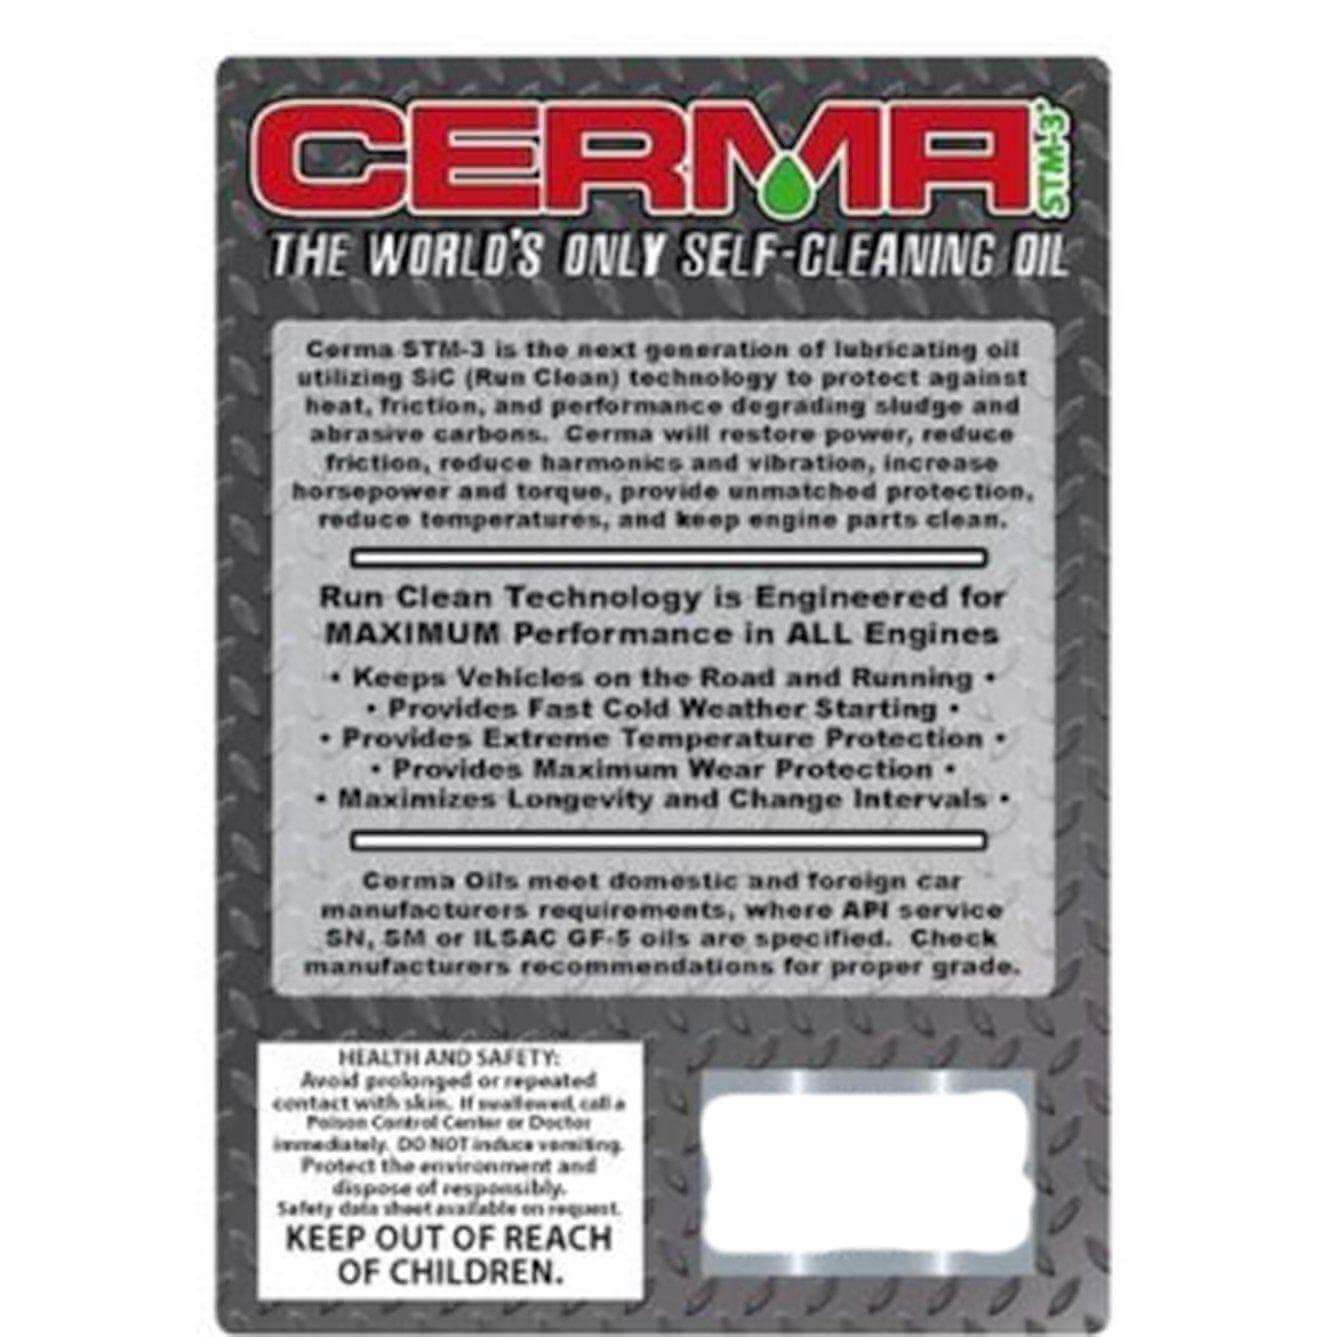 Cermax Ceramic 10w-40W Synthetic Motor Oil at $16.96 only from cermatreatment.com